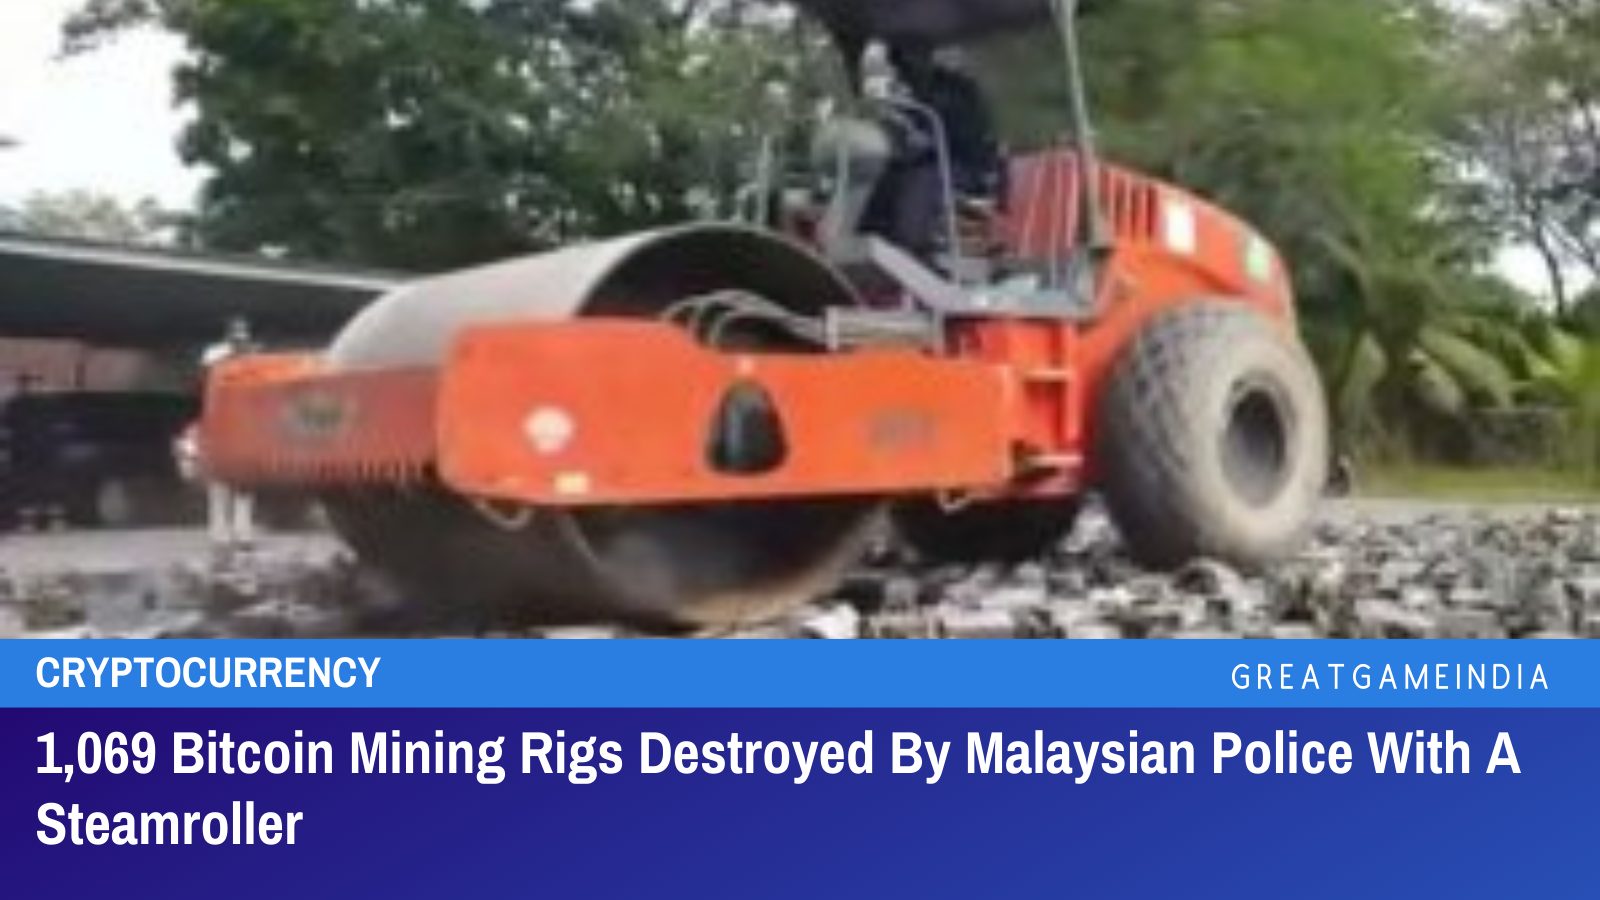 1,069 Bitcoin Mining Rigs Destroyed By Malaysian Police With A Steamroller